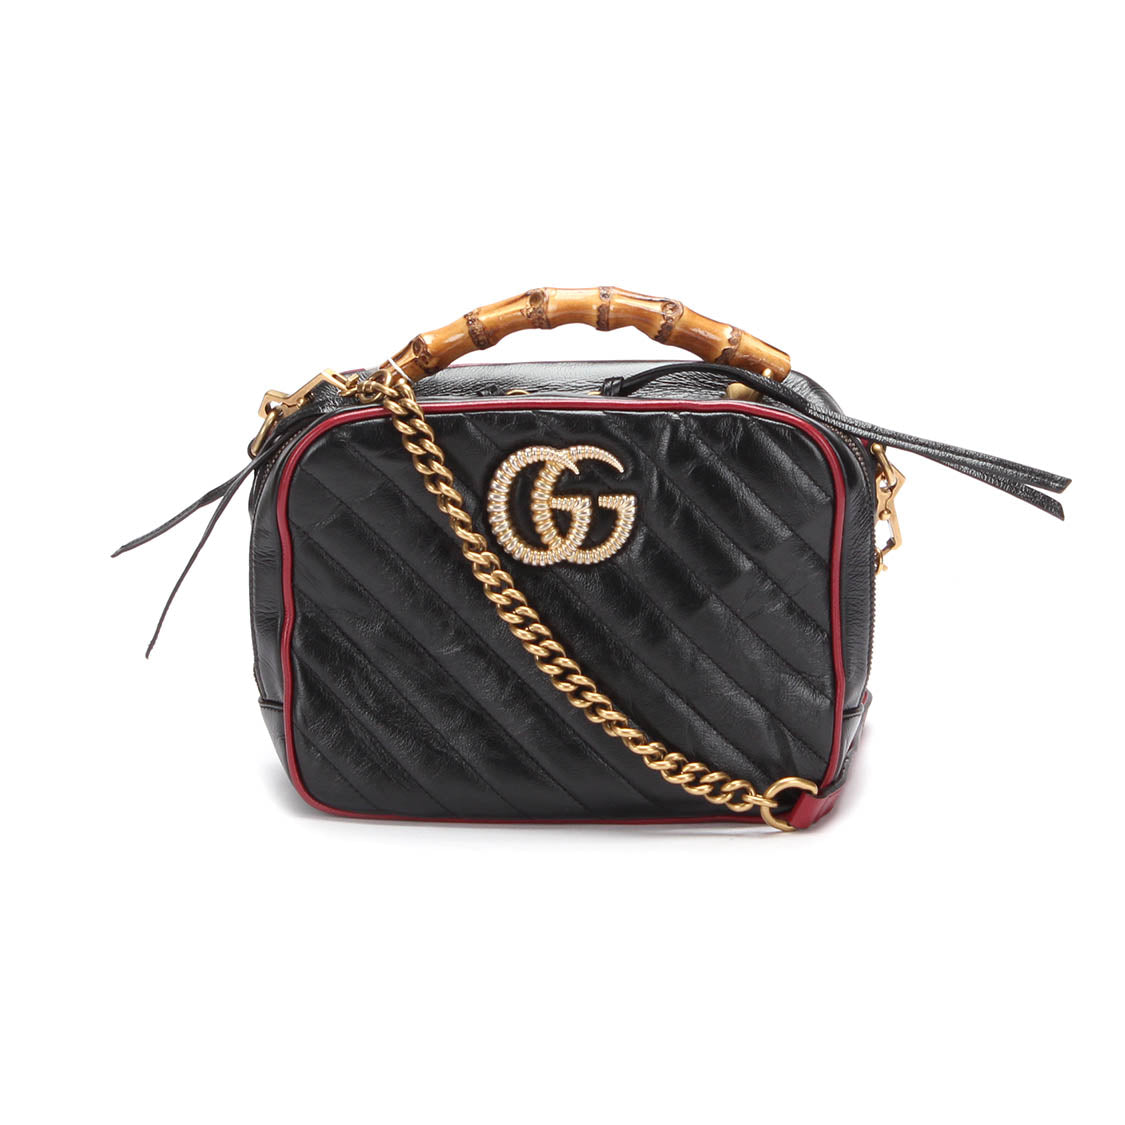 GG Marmont Bamboo Leather Shoulder Bag 602270